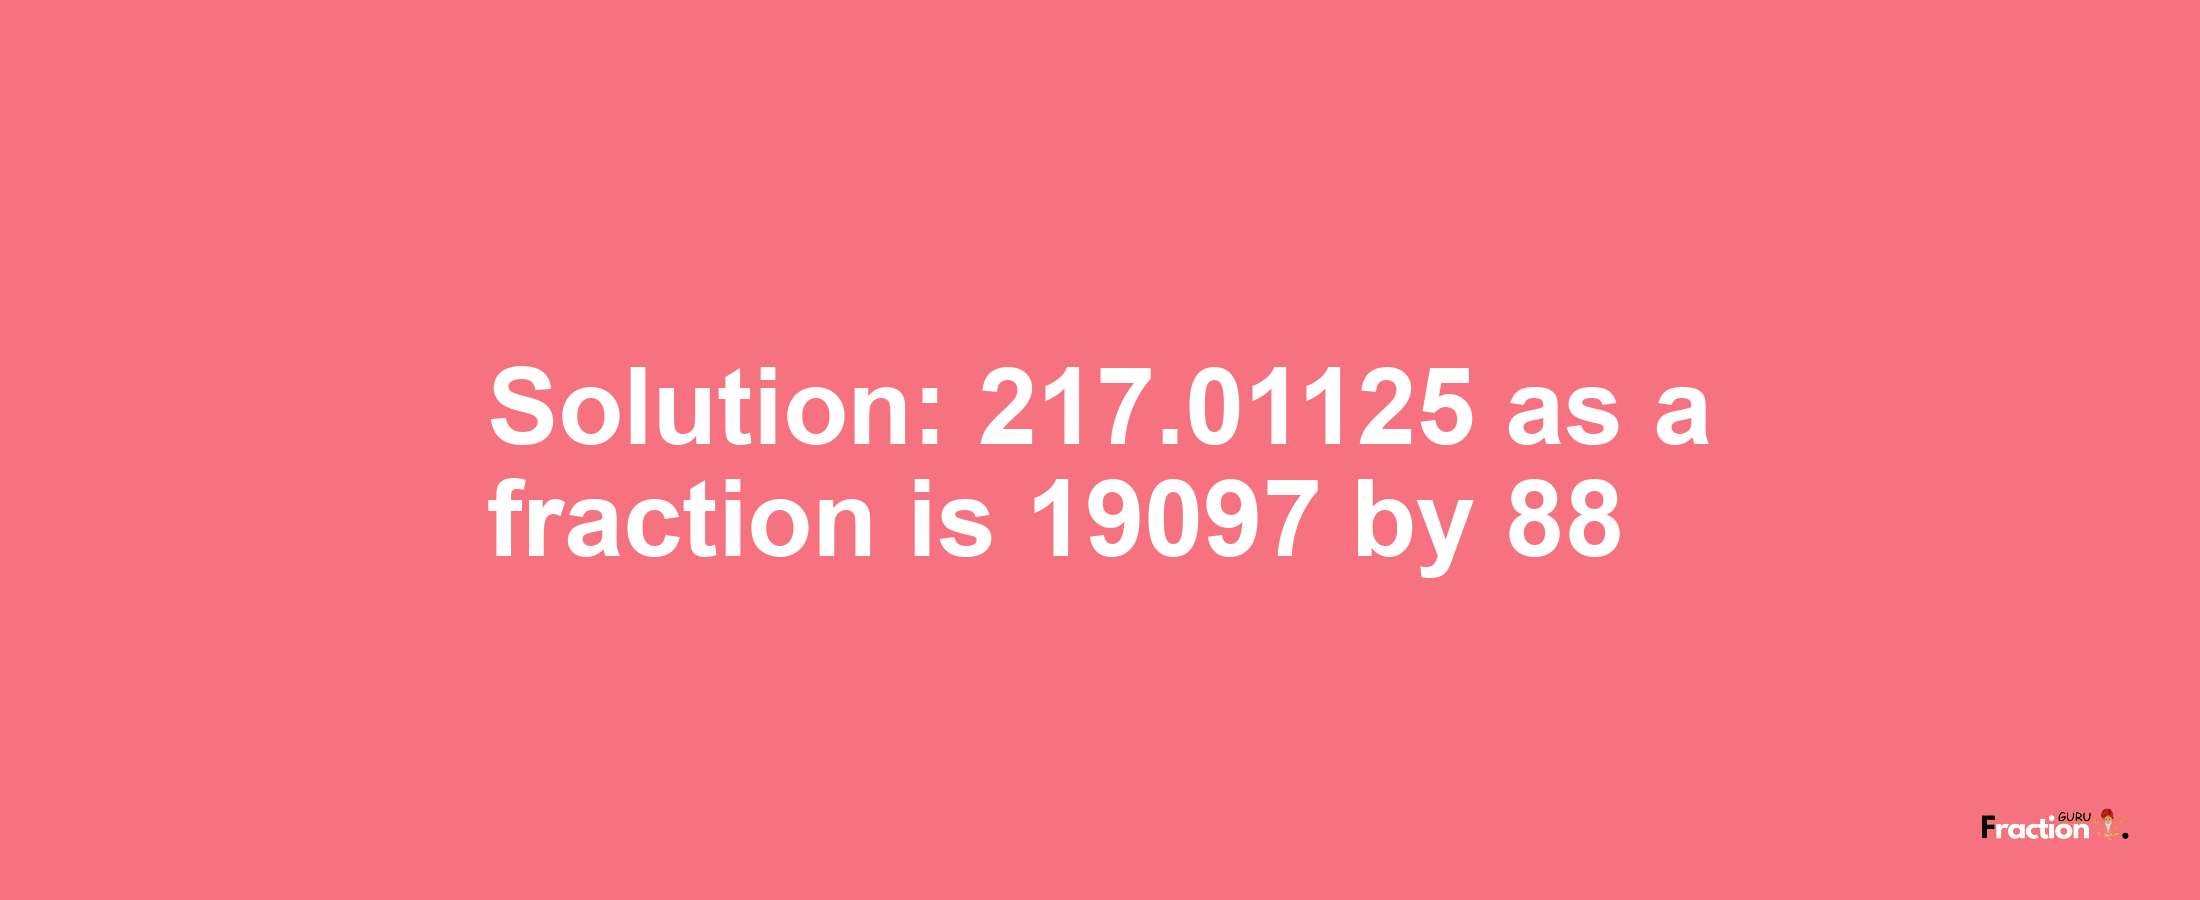 Solution:217.01125 as a fraction is 19097/88